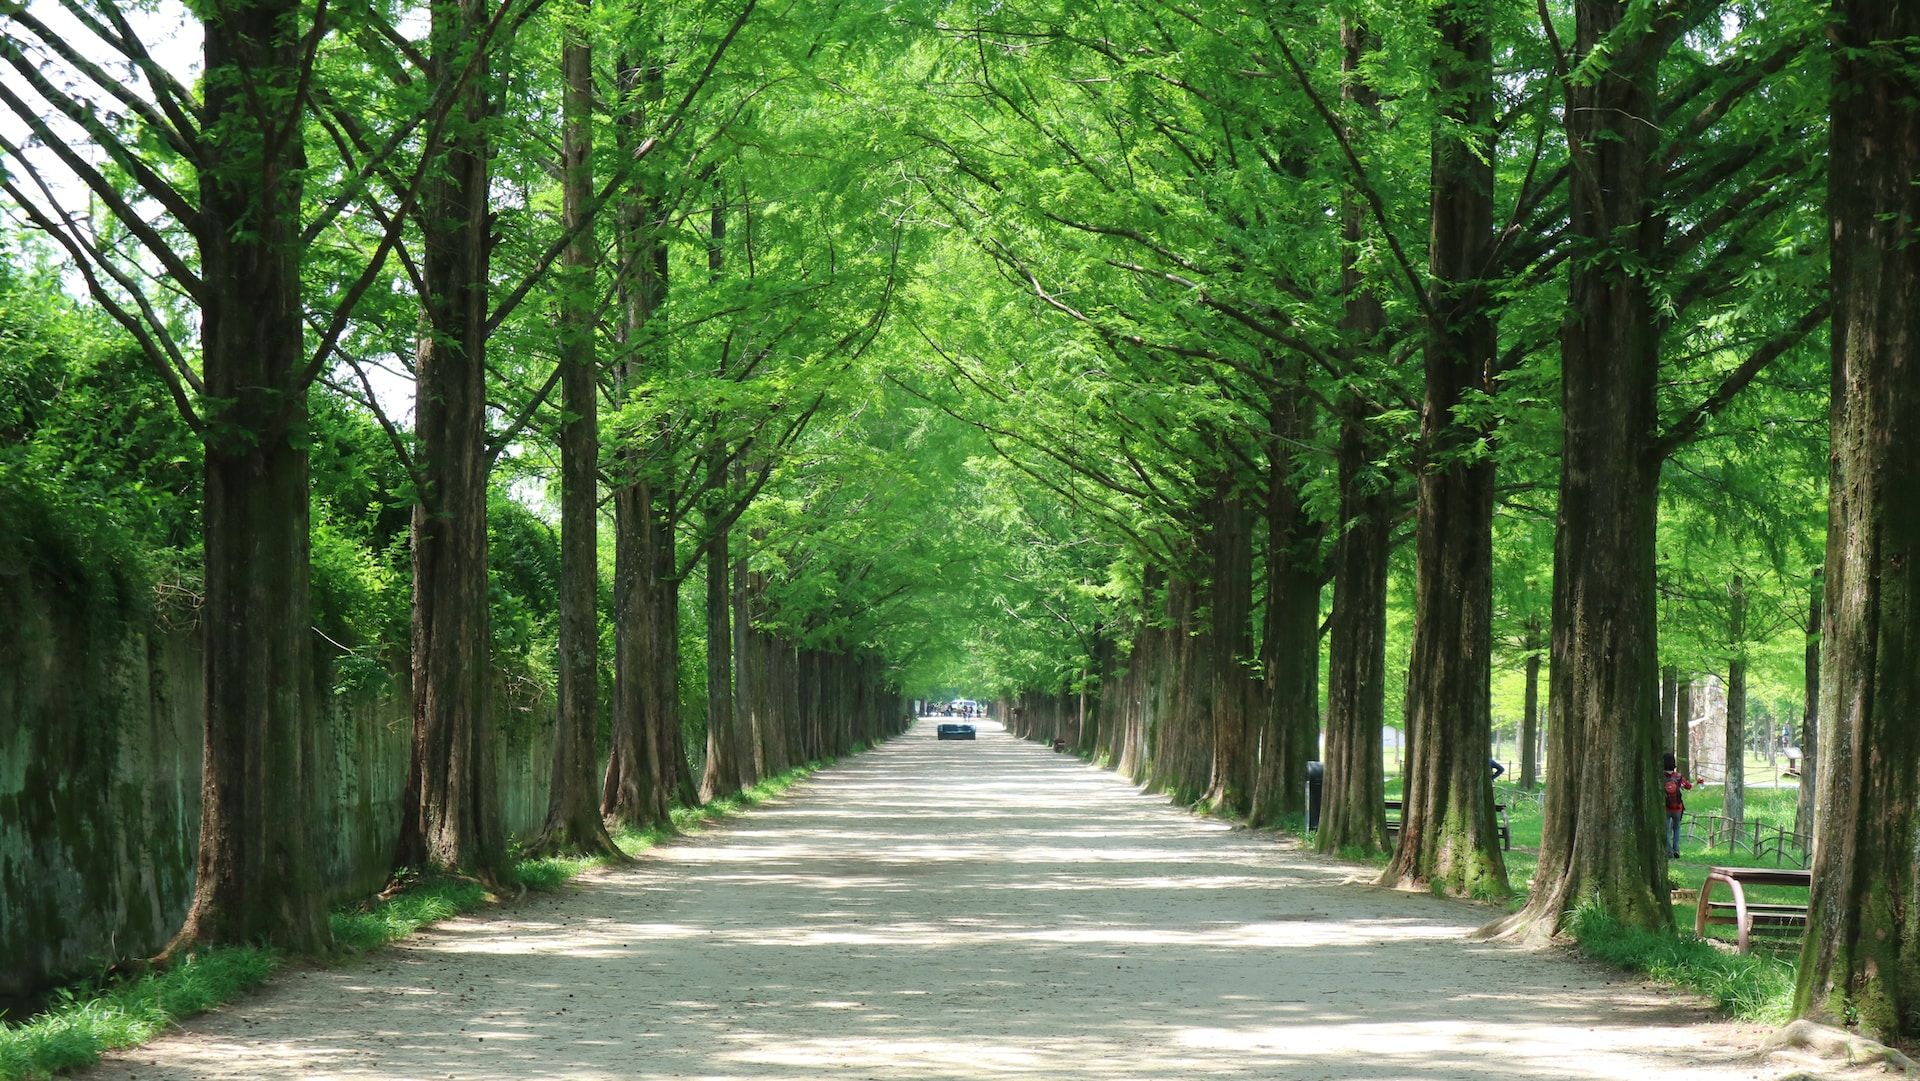 A path with trees in Damyang, South Korea